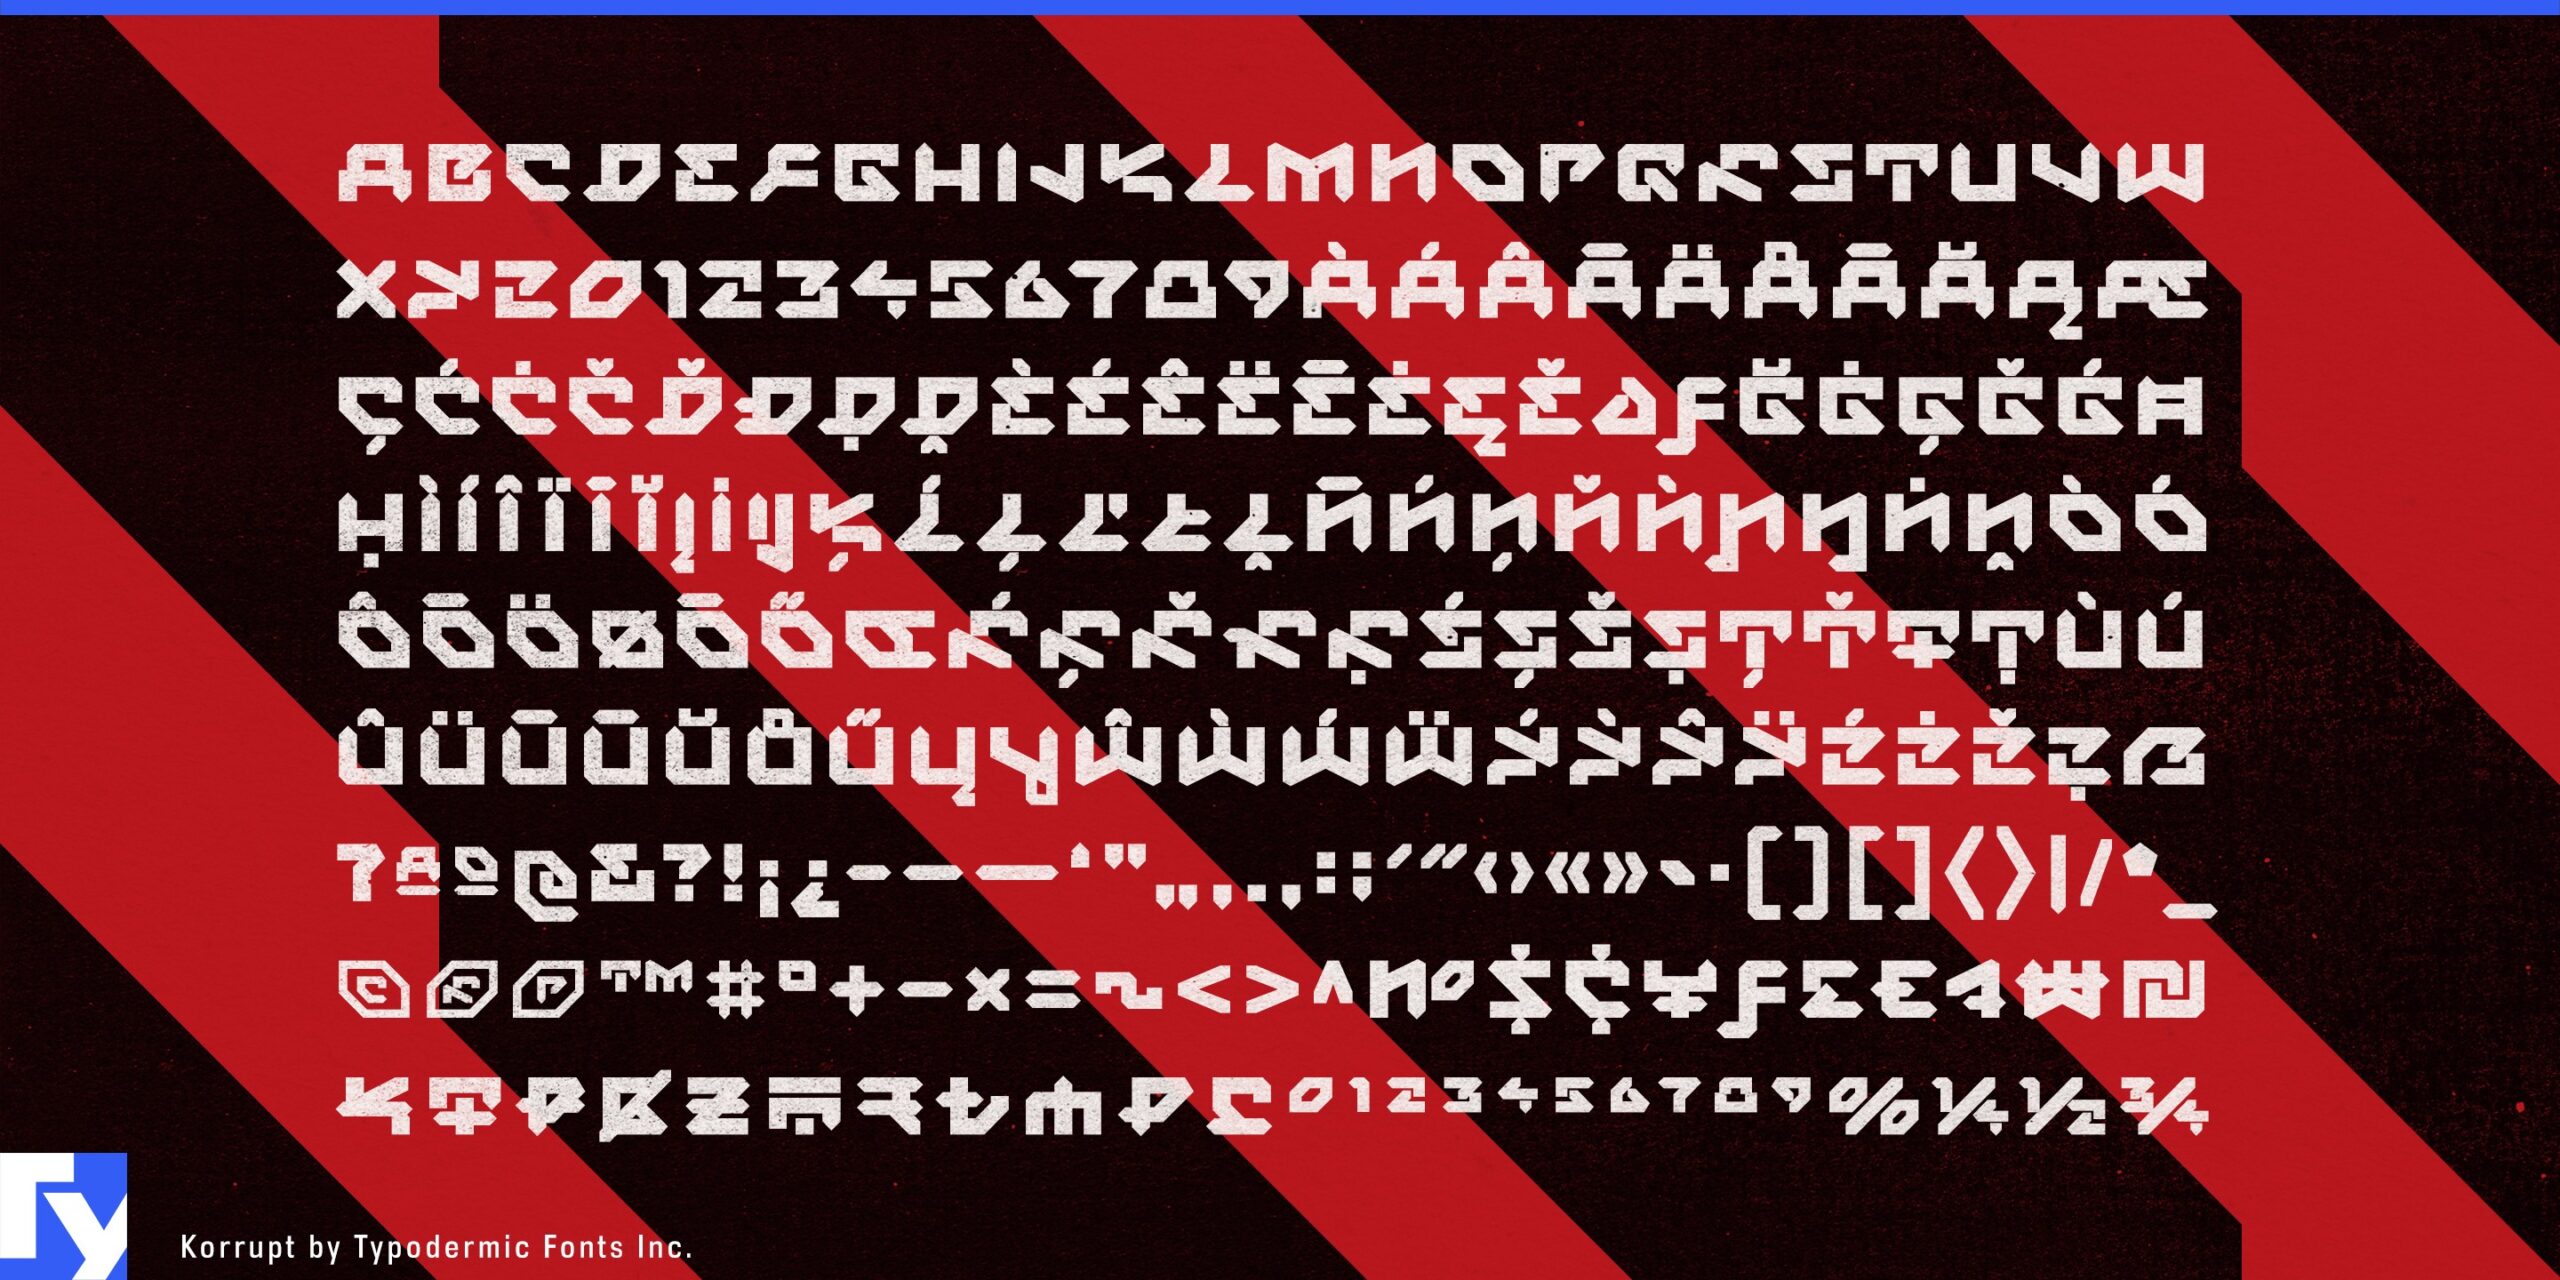 Post-Singularity Metadystopia: Korrupt Typeface Defines a Twisted Future